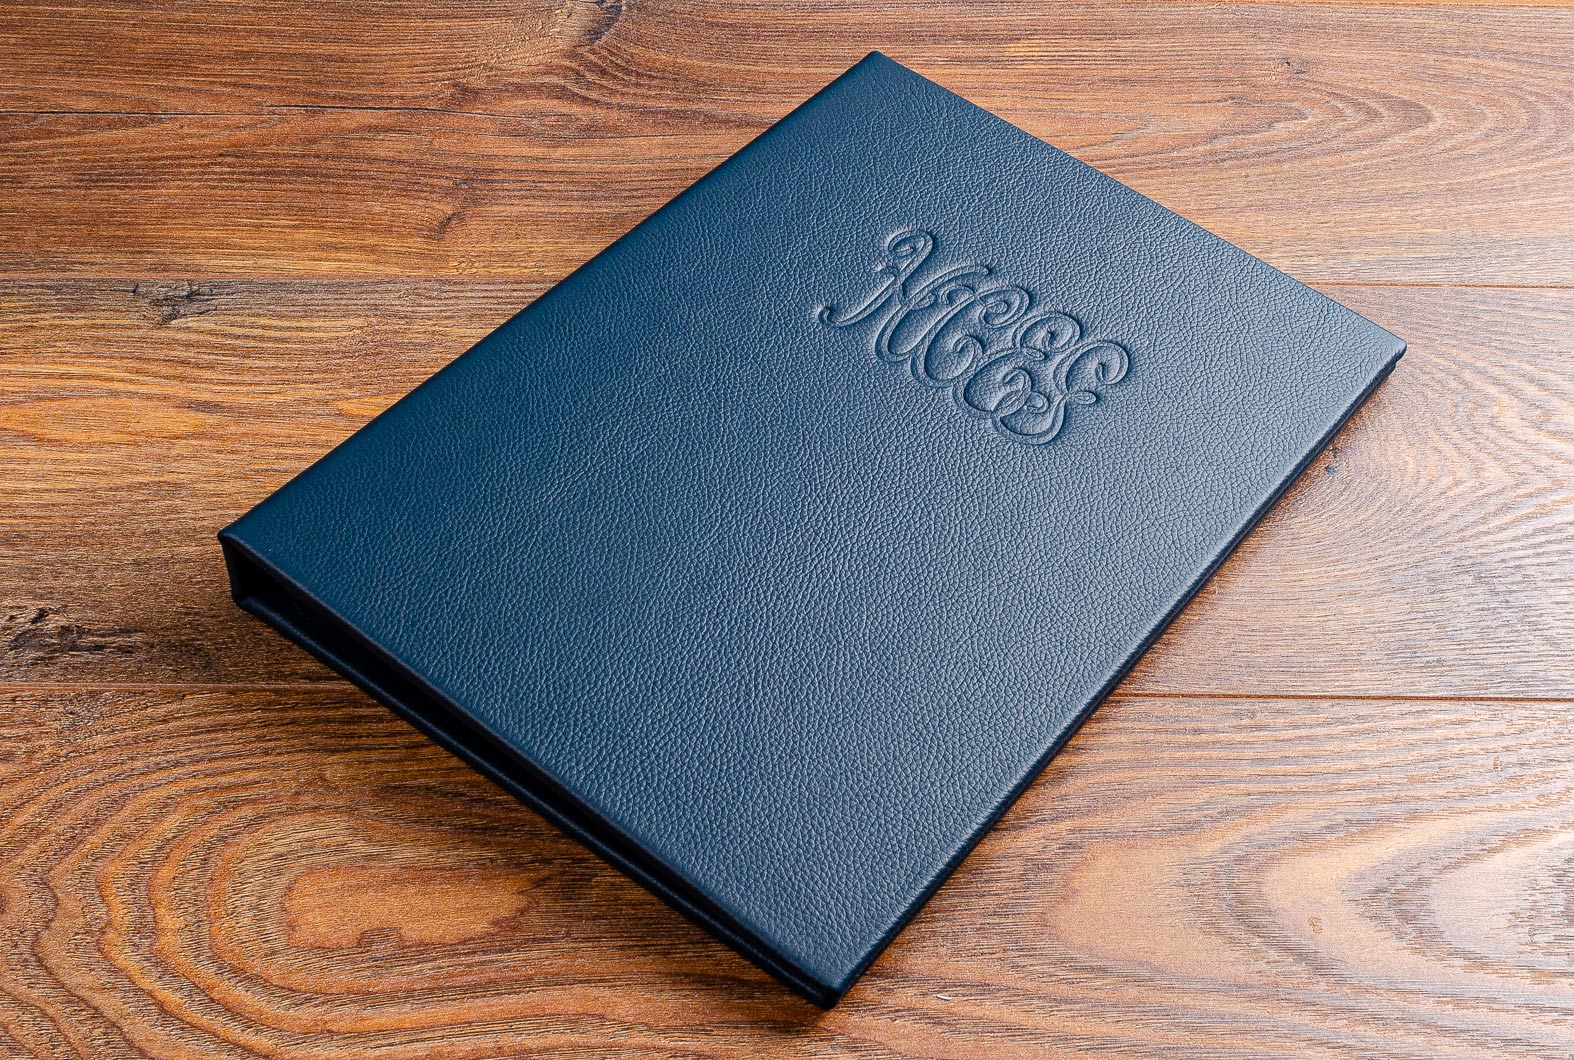 finest quality luxury leather menu with personalized embossed logo on cover